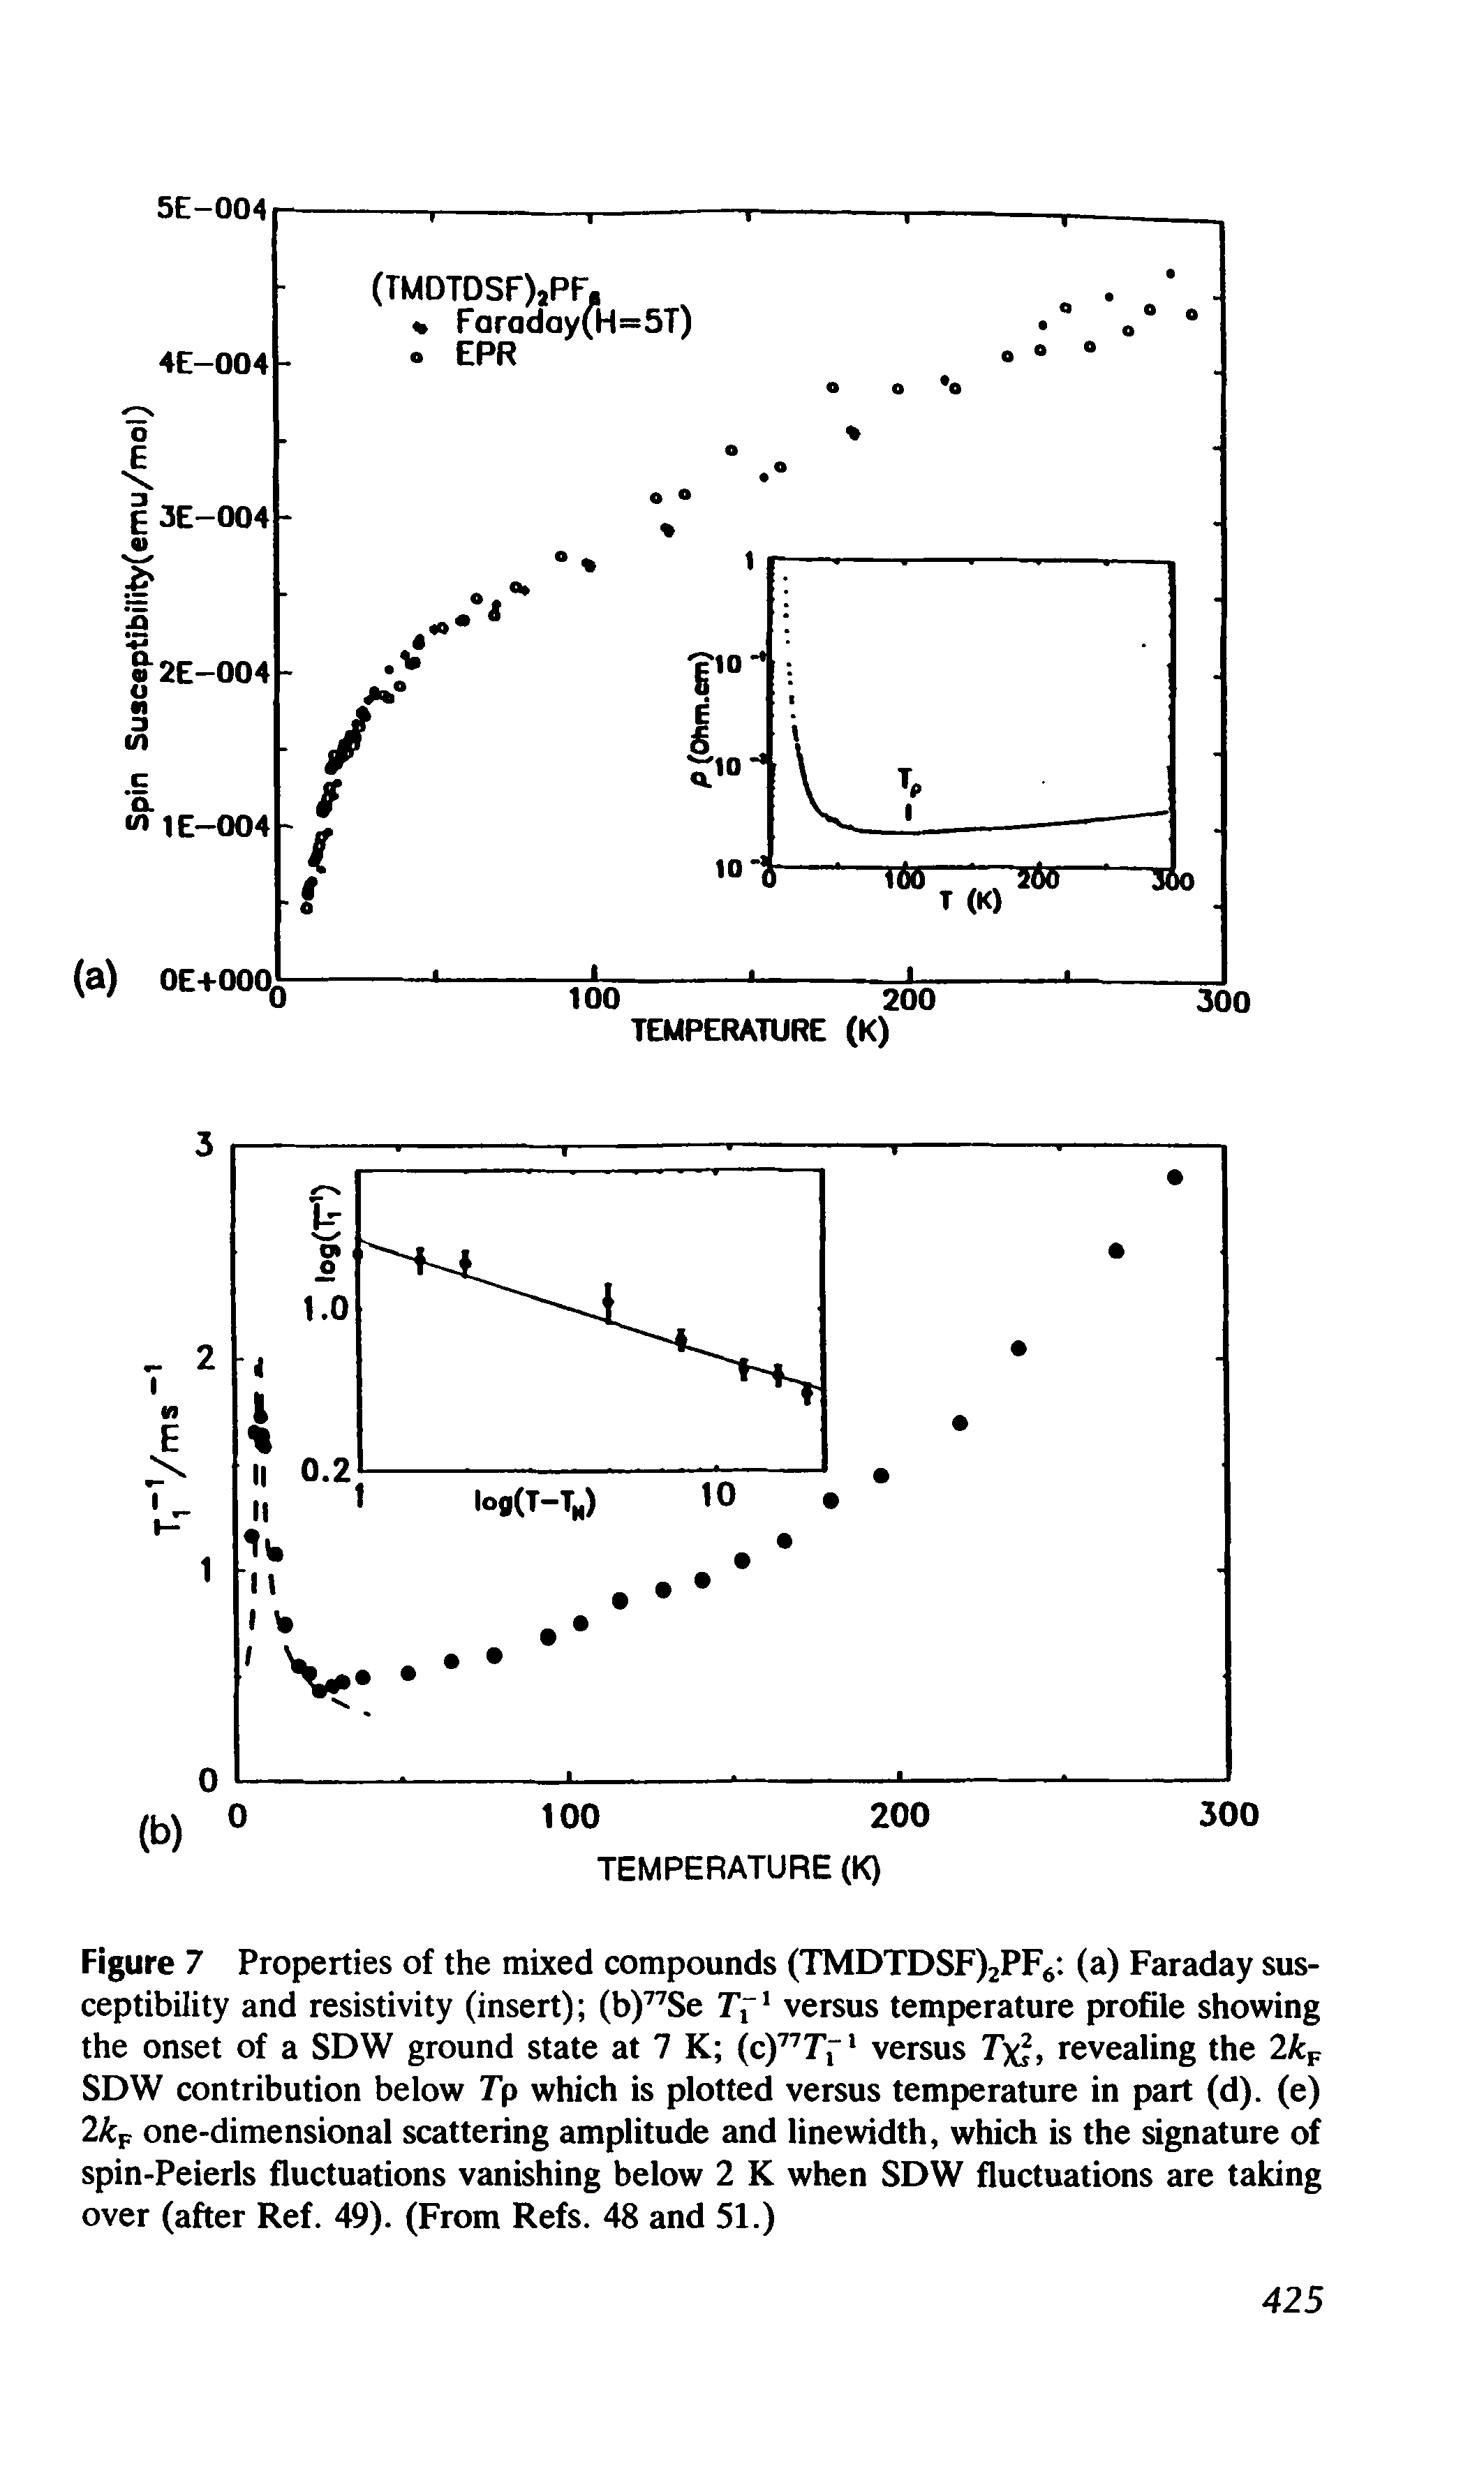 Figure 7 Properties of the mixed compounds (TMDTDSF)2PF6 (a) Faraday susceptibility and resistivity (insert) (b)77Se 7Y1 versus temperature profile showing the onset of a SDW ground state at 7 K (c)777 f1 versus T, revealing the 2kF SDW contribution below 7p which is plotted versus temperature in part (d). (e) 2kF one-dimensional scattering amplitude and linewidth, which is the signature of spin-Peierls fluctuations vanishing below 2 K when SDW fluctuations are taking over (after Ref. 49). (From Refs. 48 and 51.)...